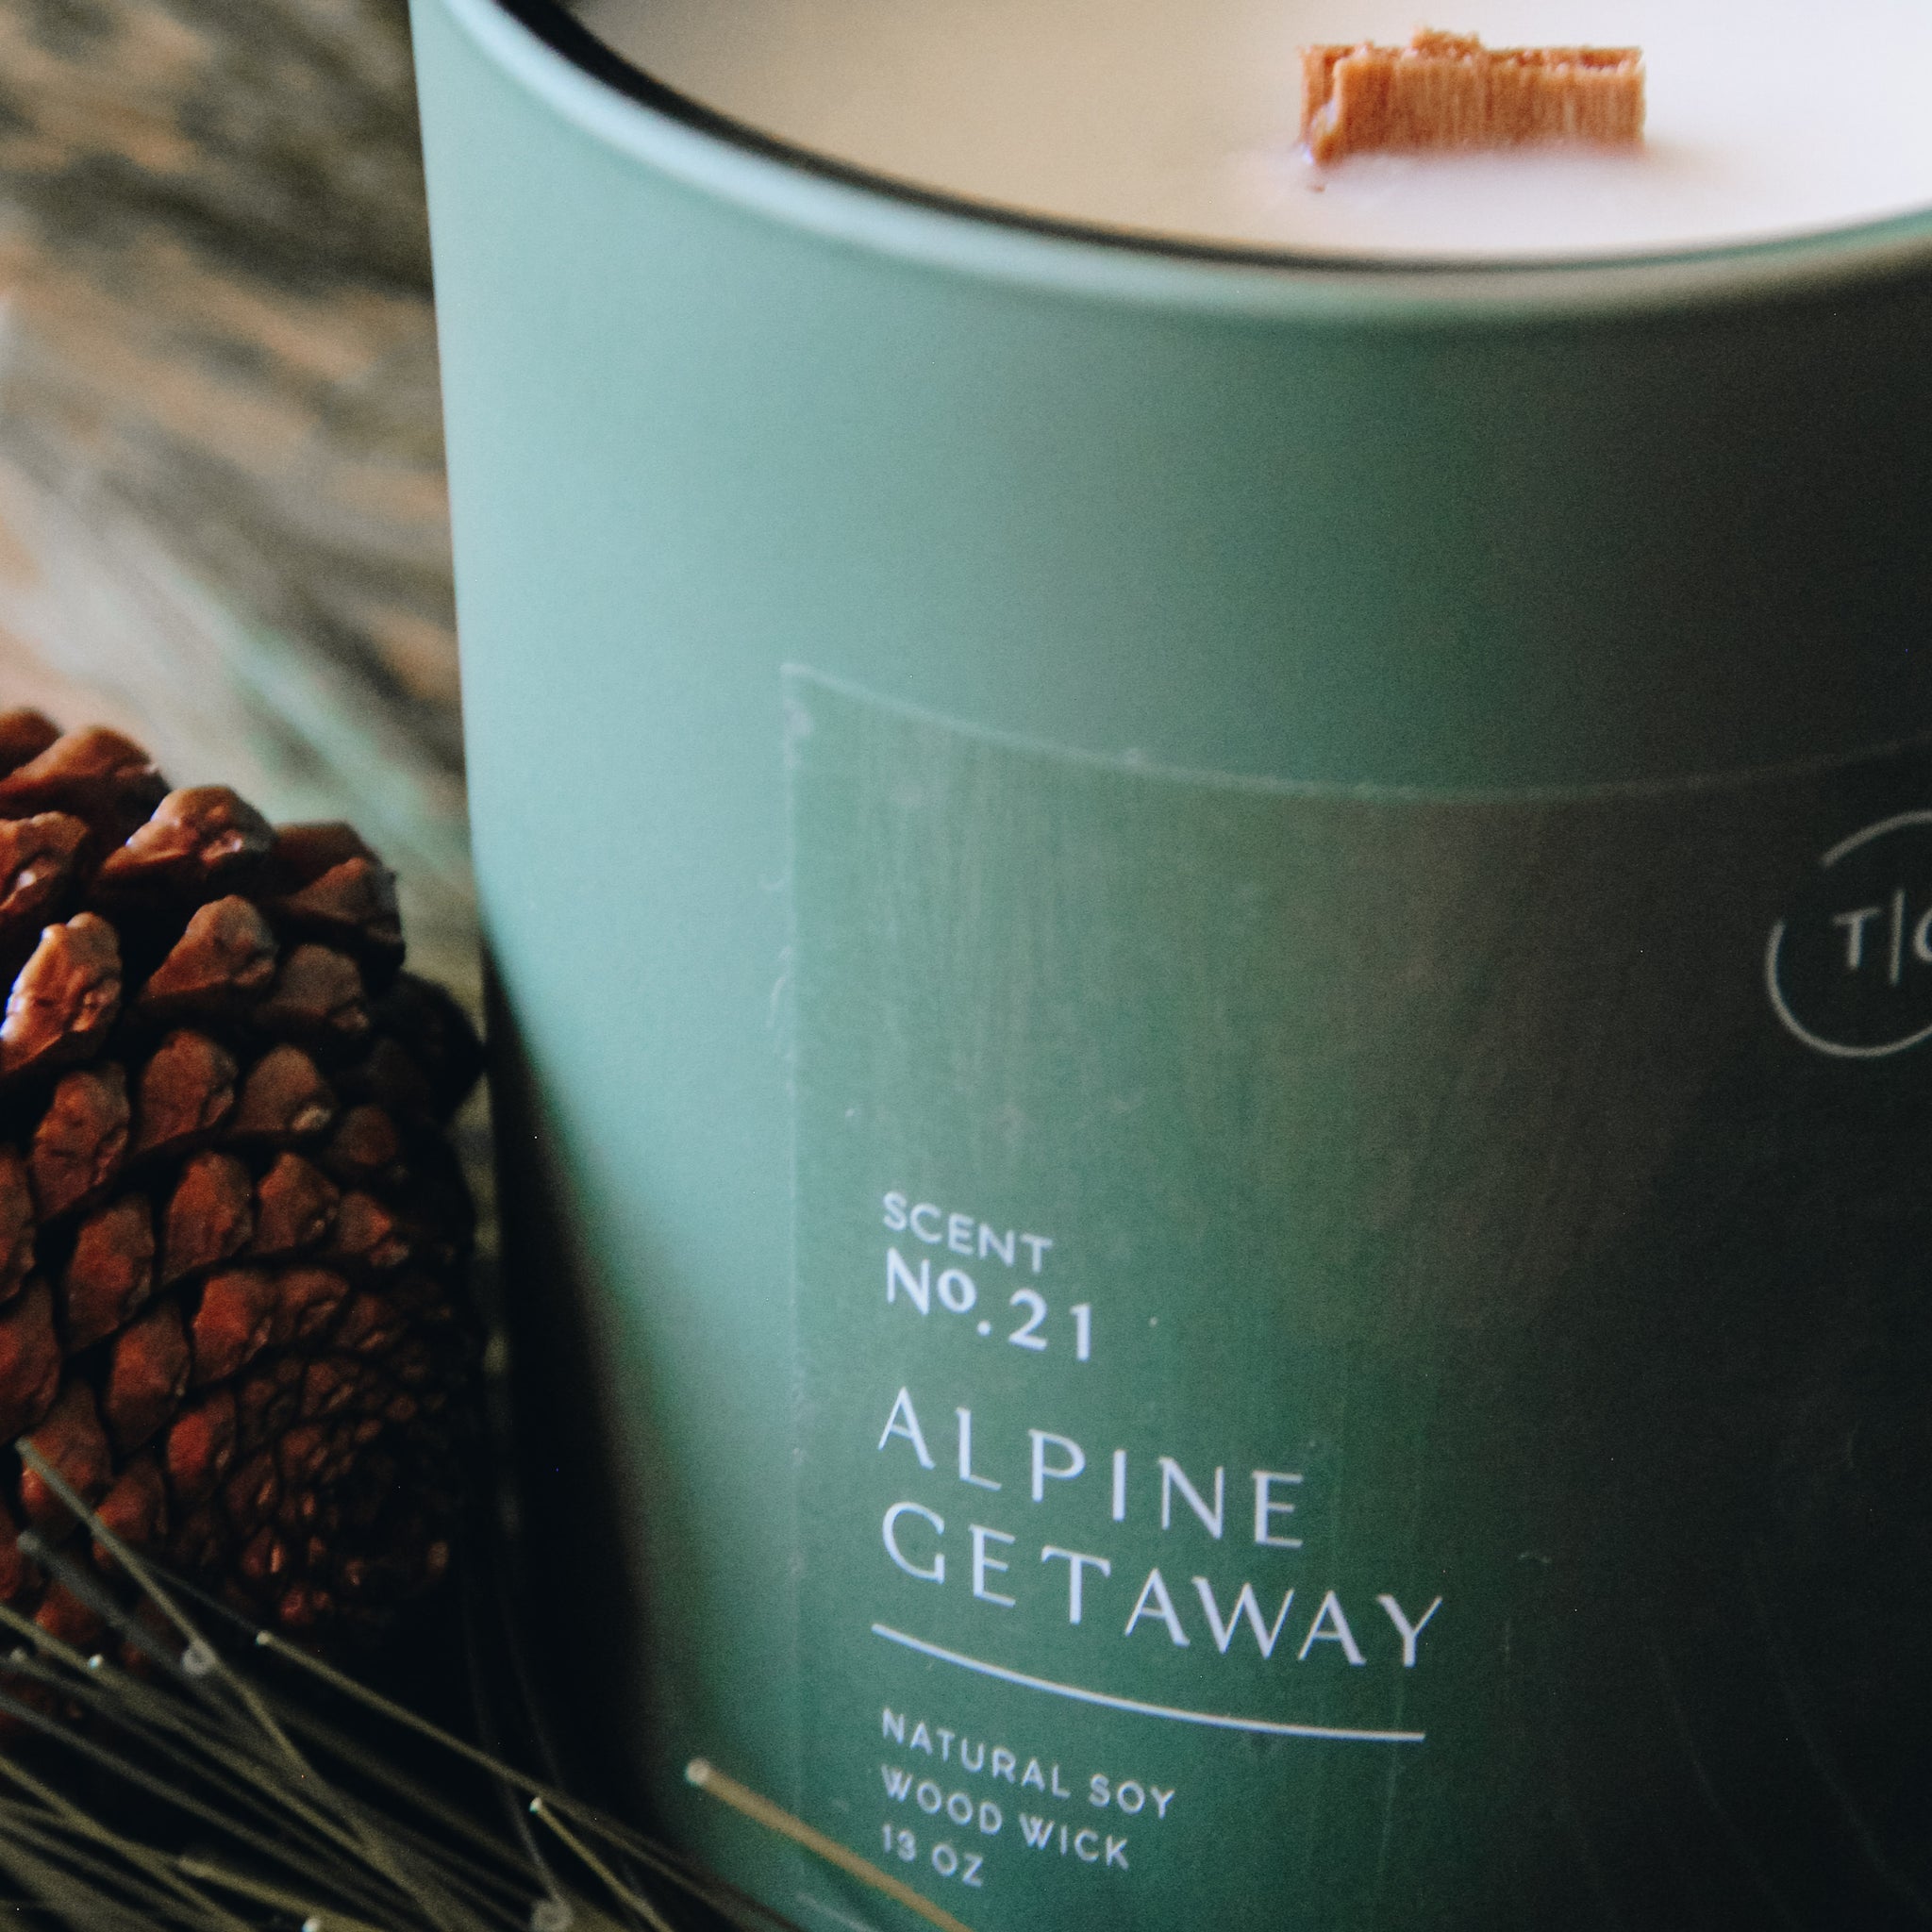 The Chandlerie's Alpine Getaway - a soy wax, wood wick candle in green glass vessel